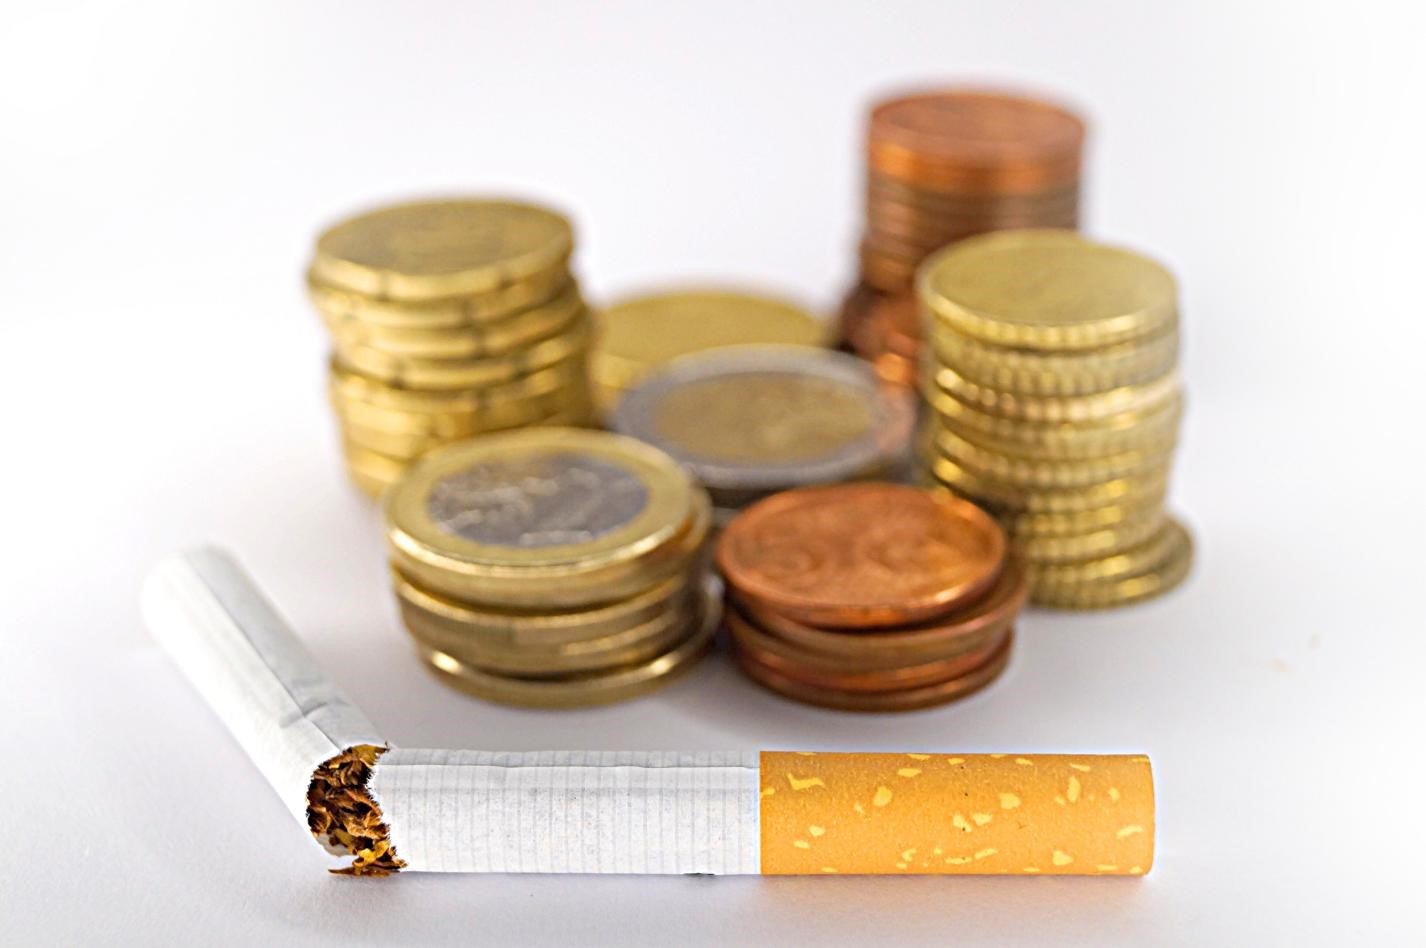 How Tobacco Use Impacts Your Finances: Quit Smoking, Save Money